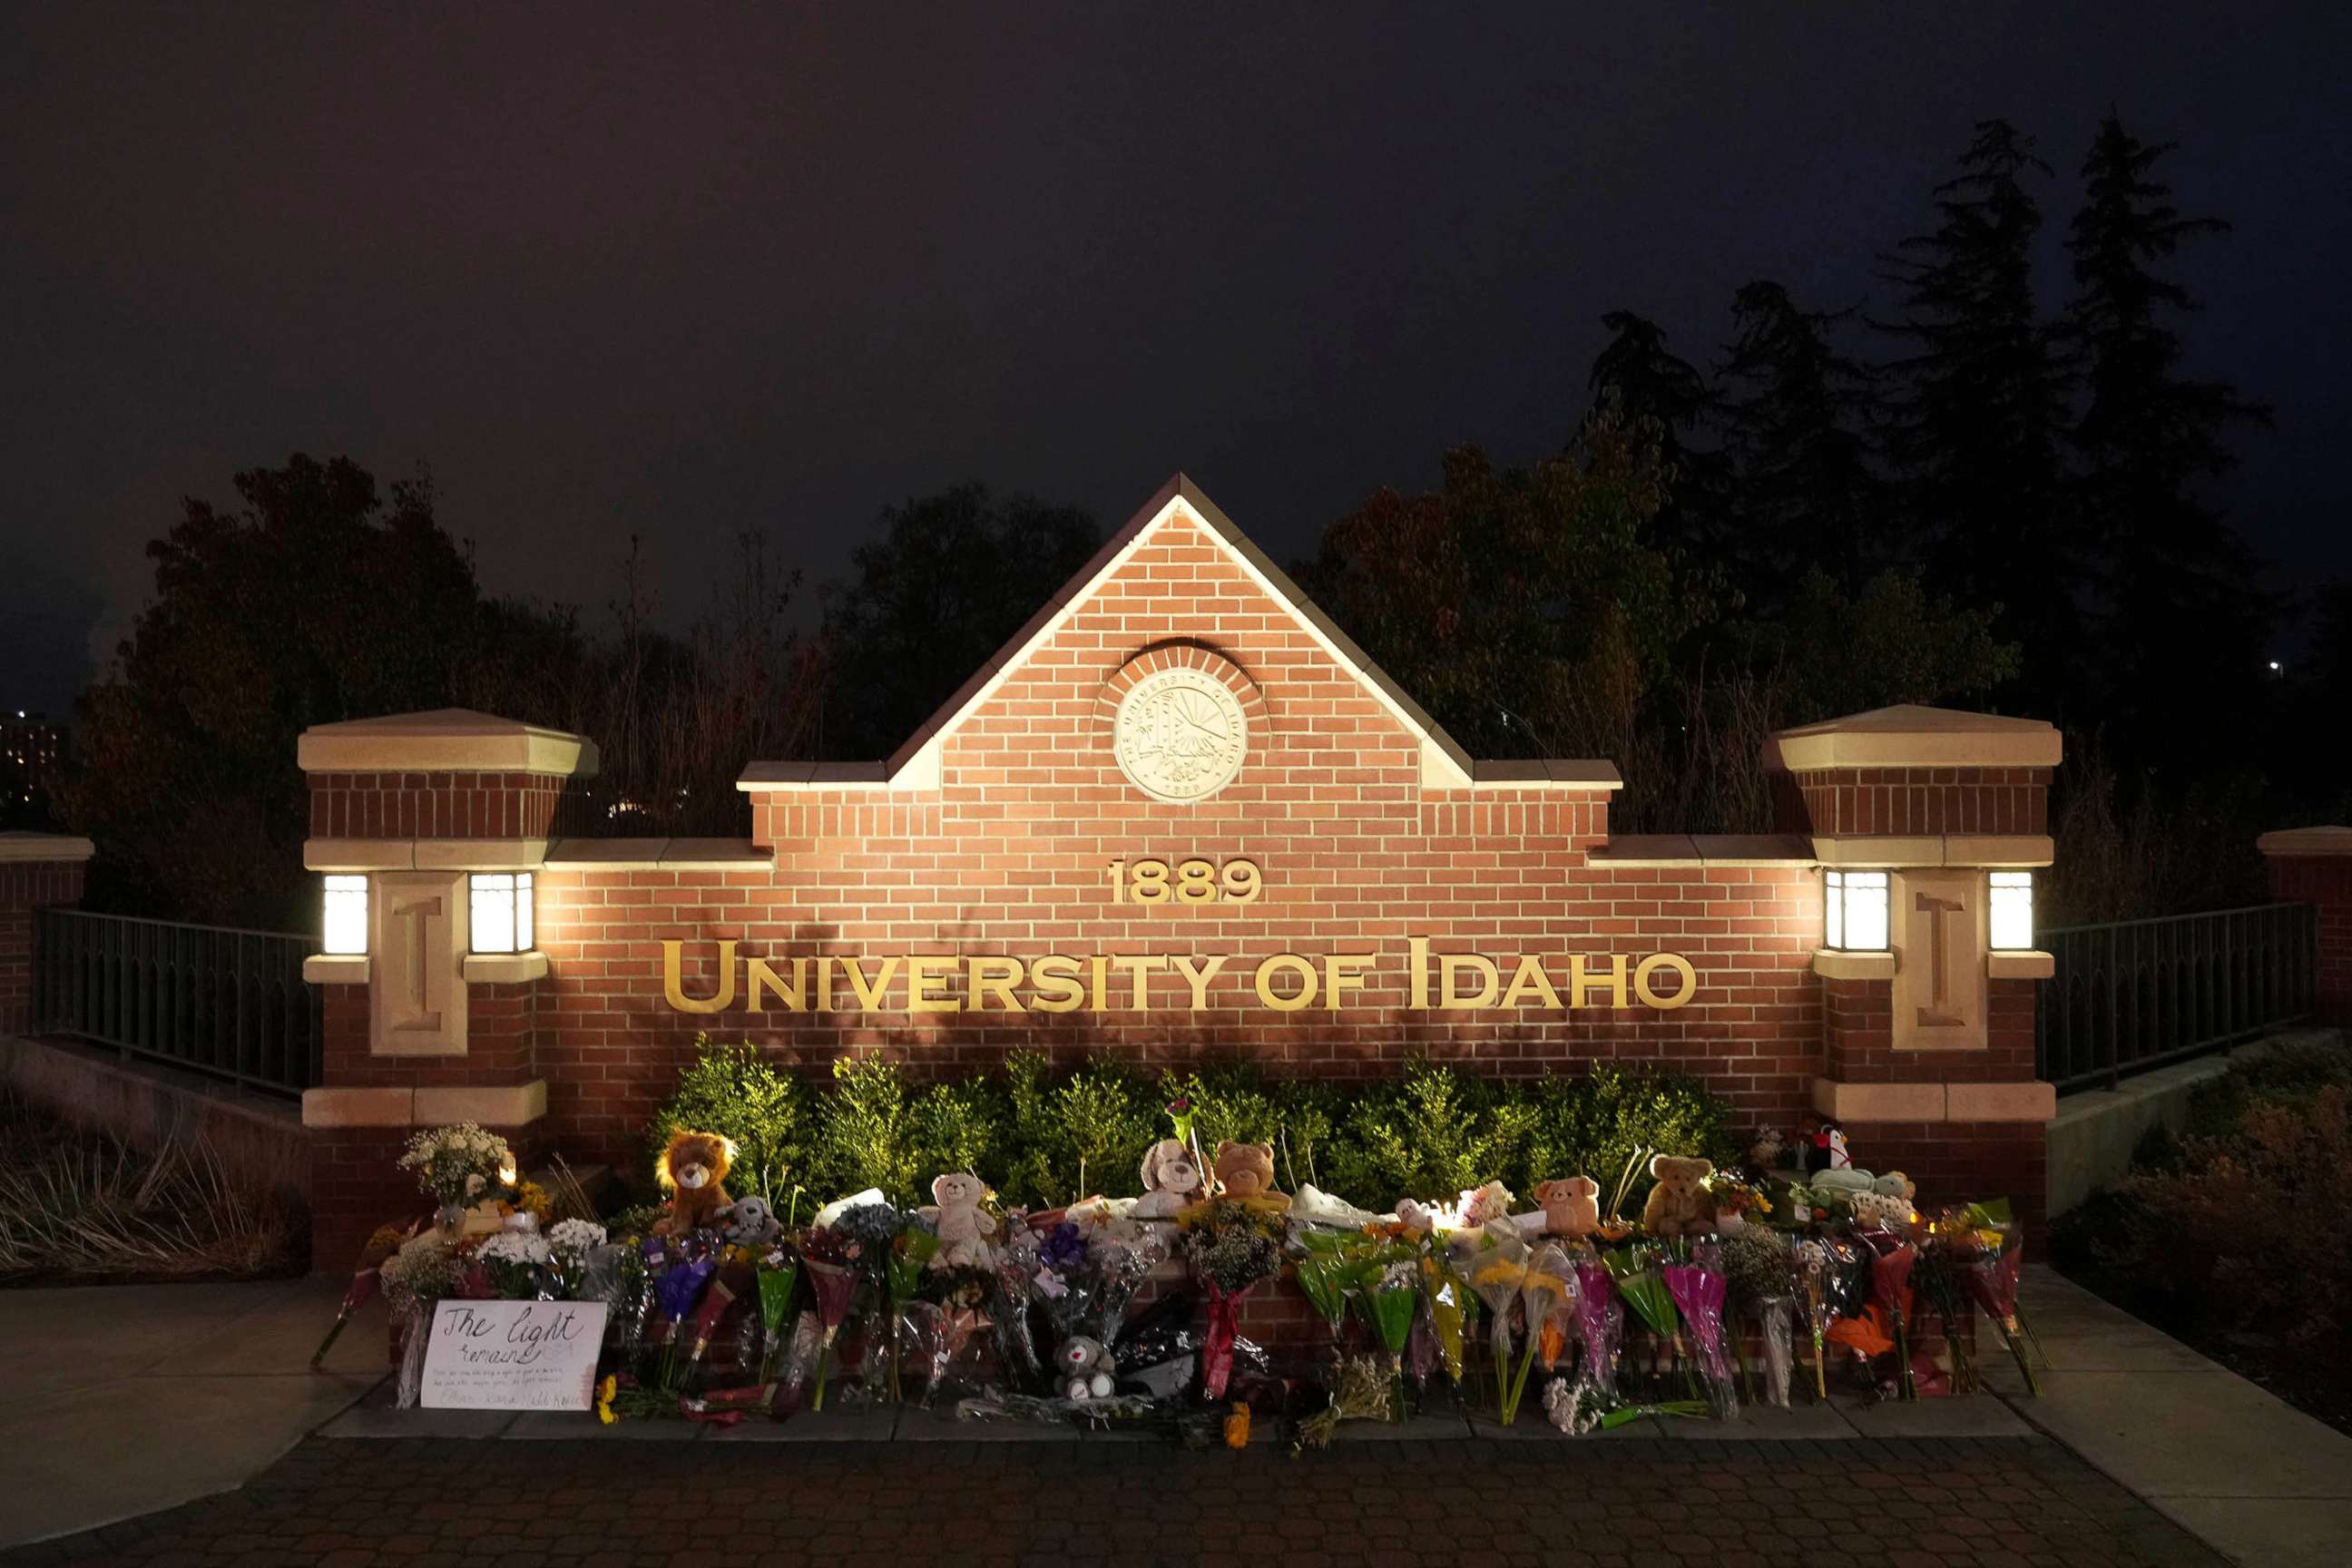 PHOTO: Flowers and other items are displayed at a growing memorial in front of a campus entrance sign for the University of Idaho, Wednesday, Nov. 16, 2022, in Moscow, Idaho.